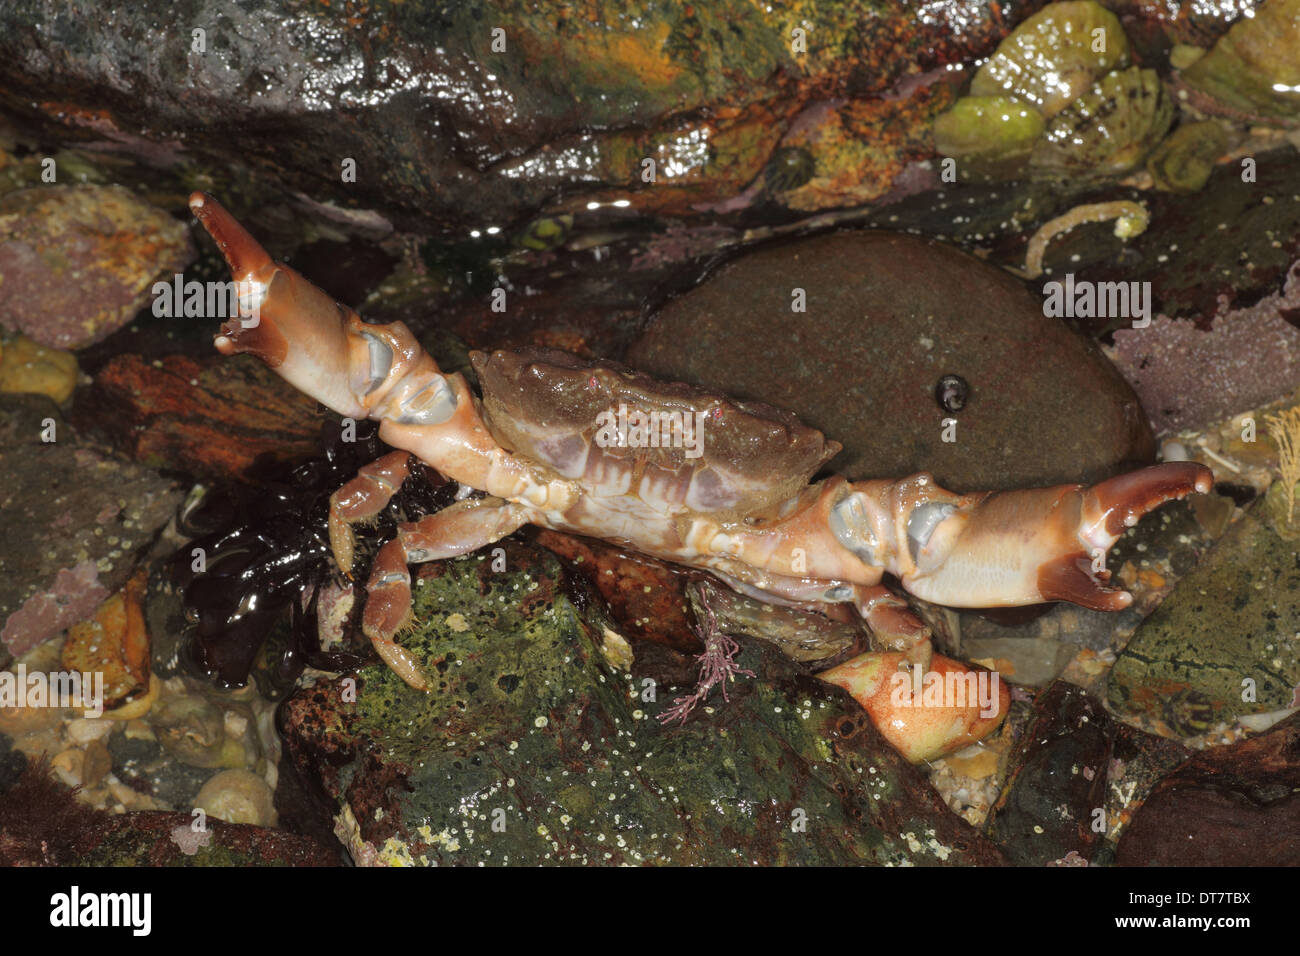 Furrowed Crab (Xantho hydrophilus) adult with claws raised in defensive posture in rockpool at low tide Mount's Bay Marazion Stock Photo